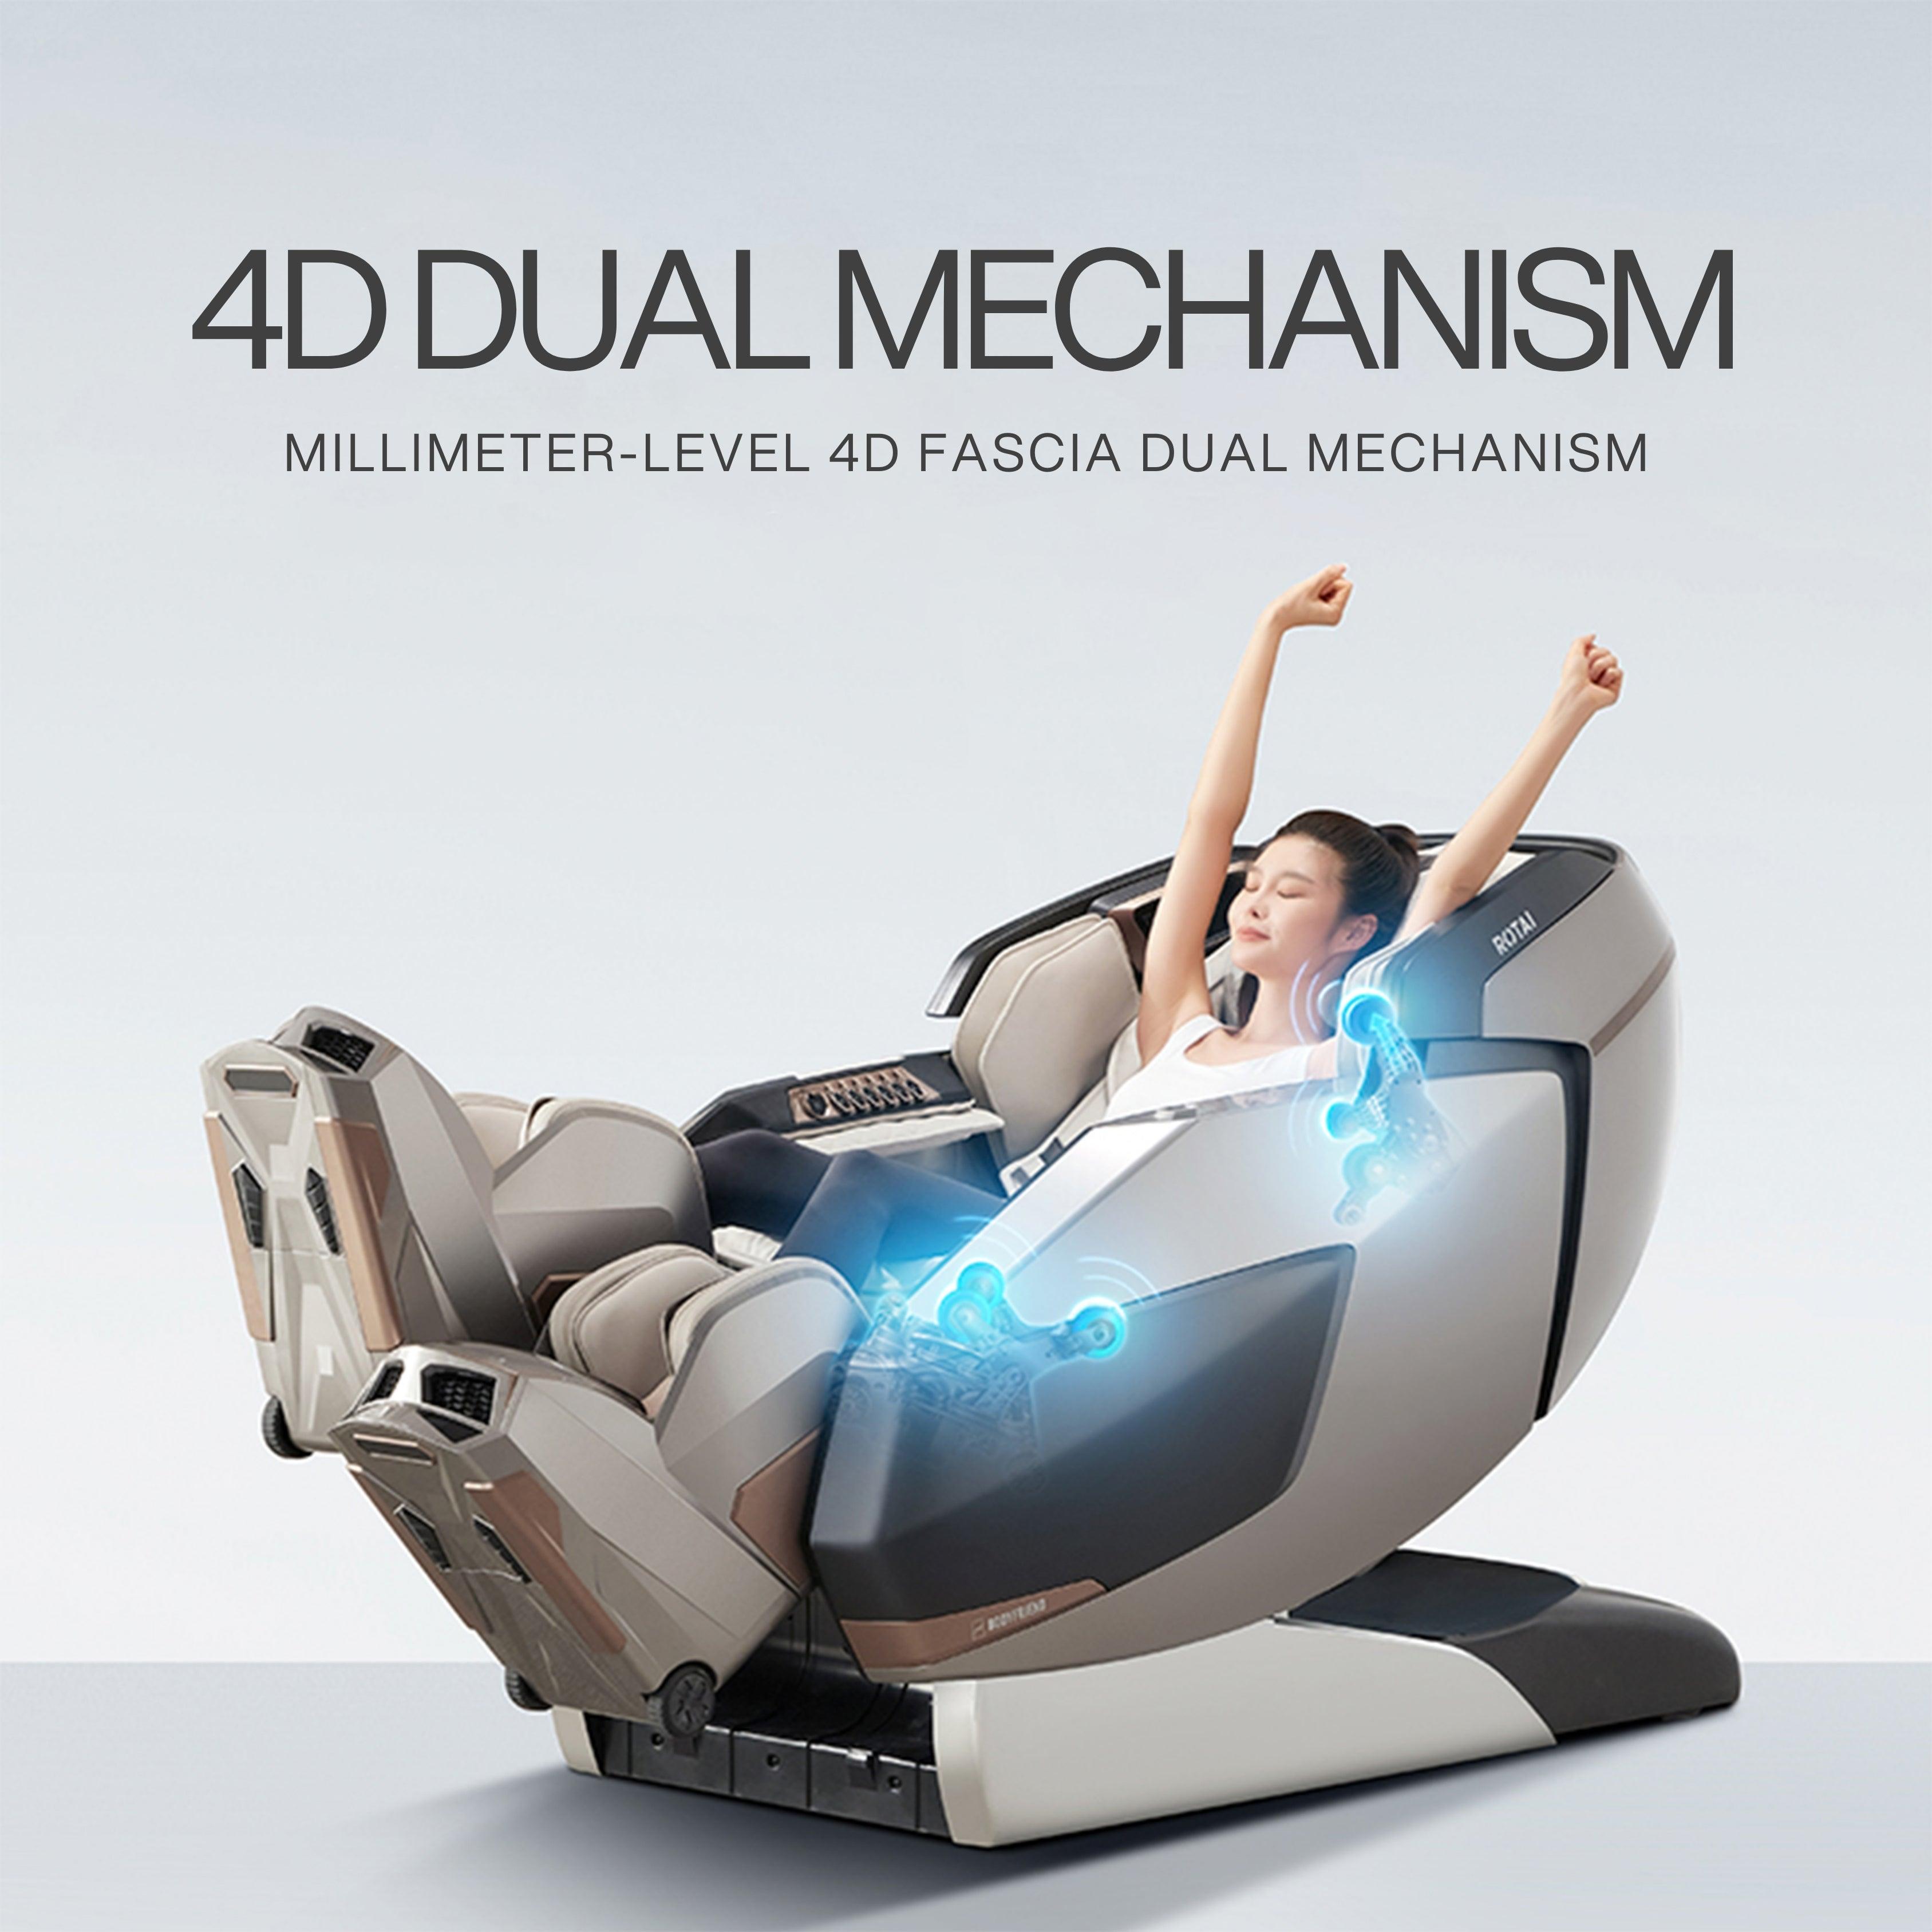 AI robotic massage chair with 4D dual mechanism in Glacier Silver, best massage chair UAE, massage chair Dubai, enhancing relaxation and blood circulation, best massage chair uae, massage chair Dubai, massage chair uae, massage chair Saudi Arabia, كرسي ال